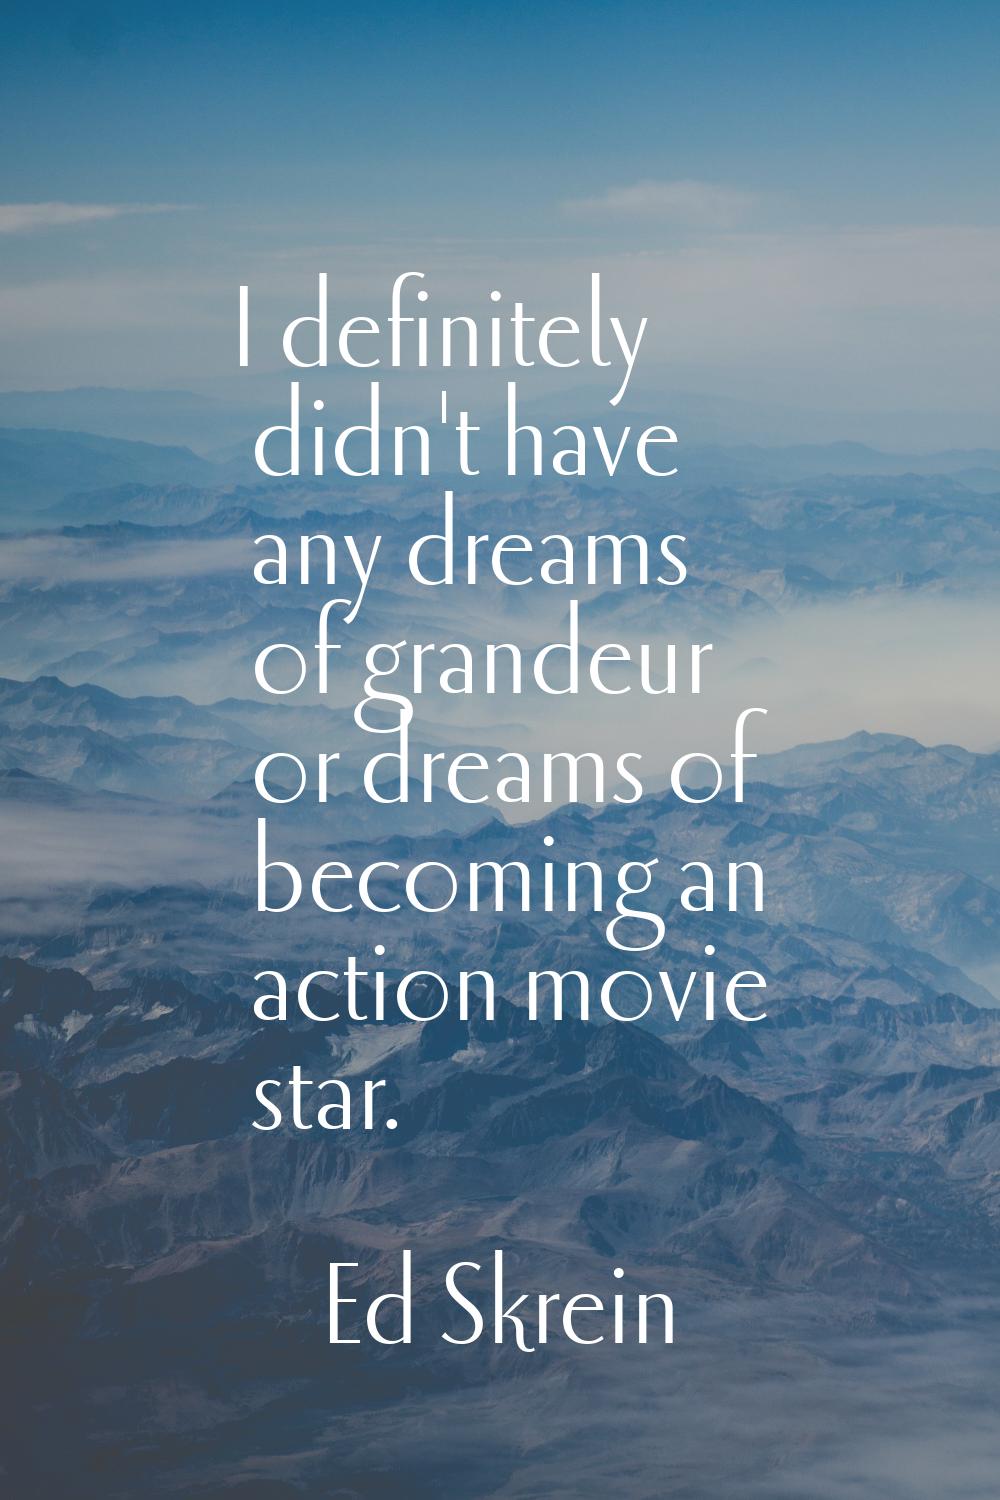 I definitely didn't have any dreams of grandeur or dreams of becoming an action movie star.